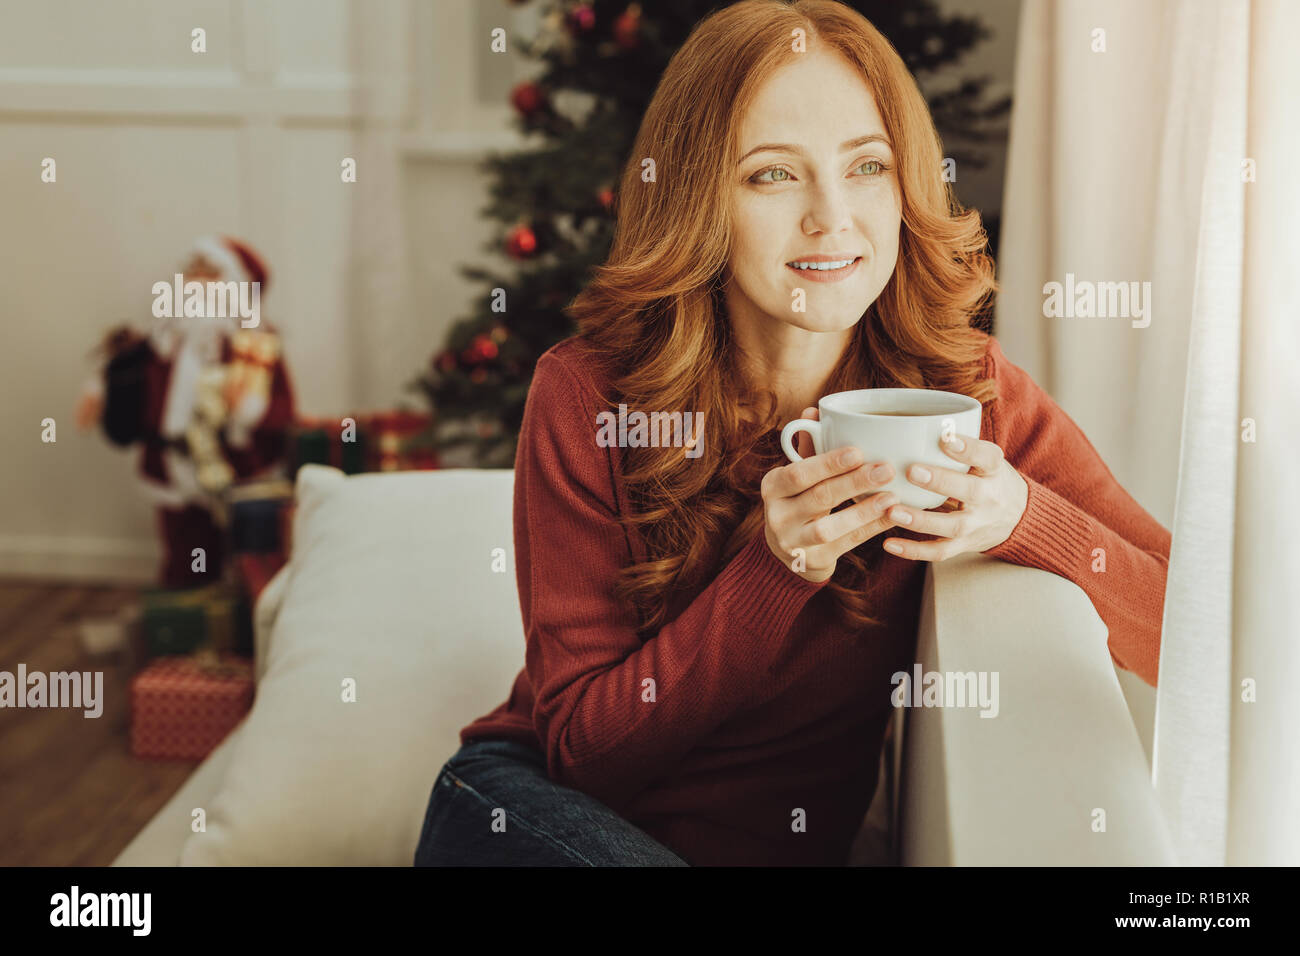 Dreamy young woman creating plans Stock Photo